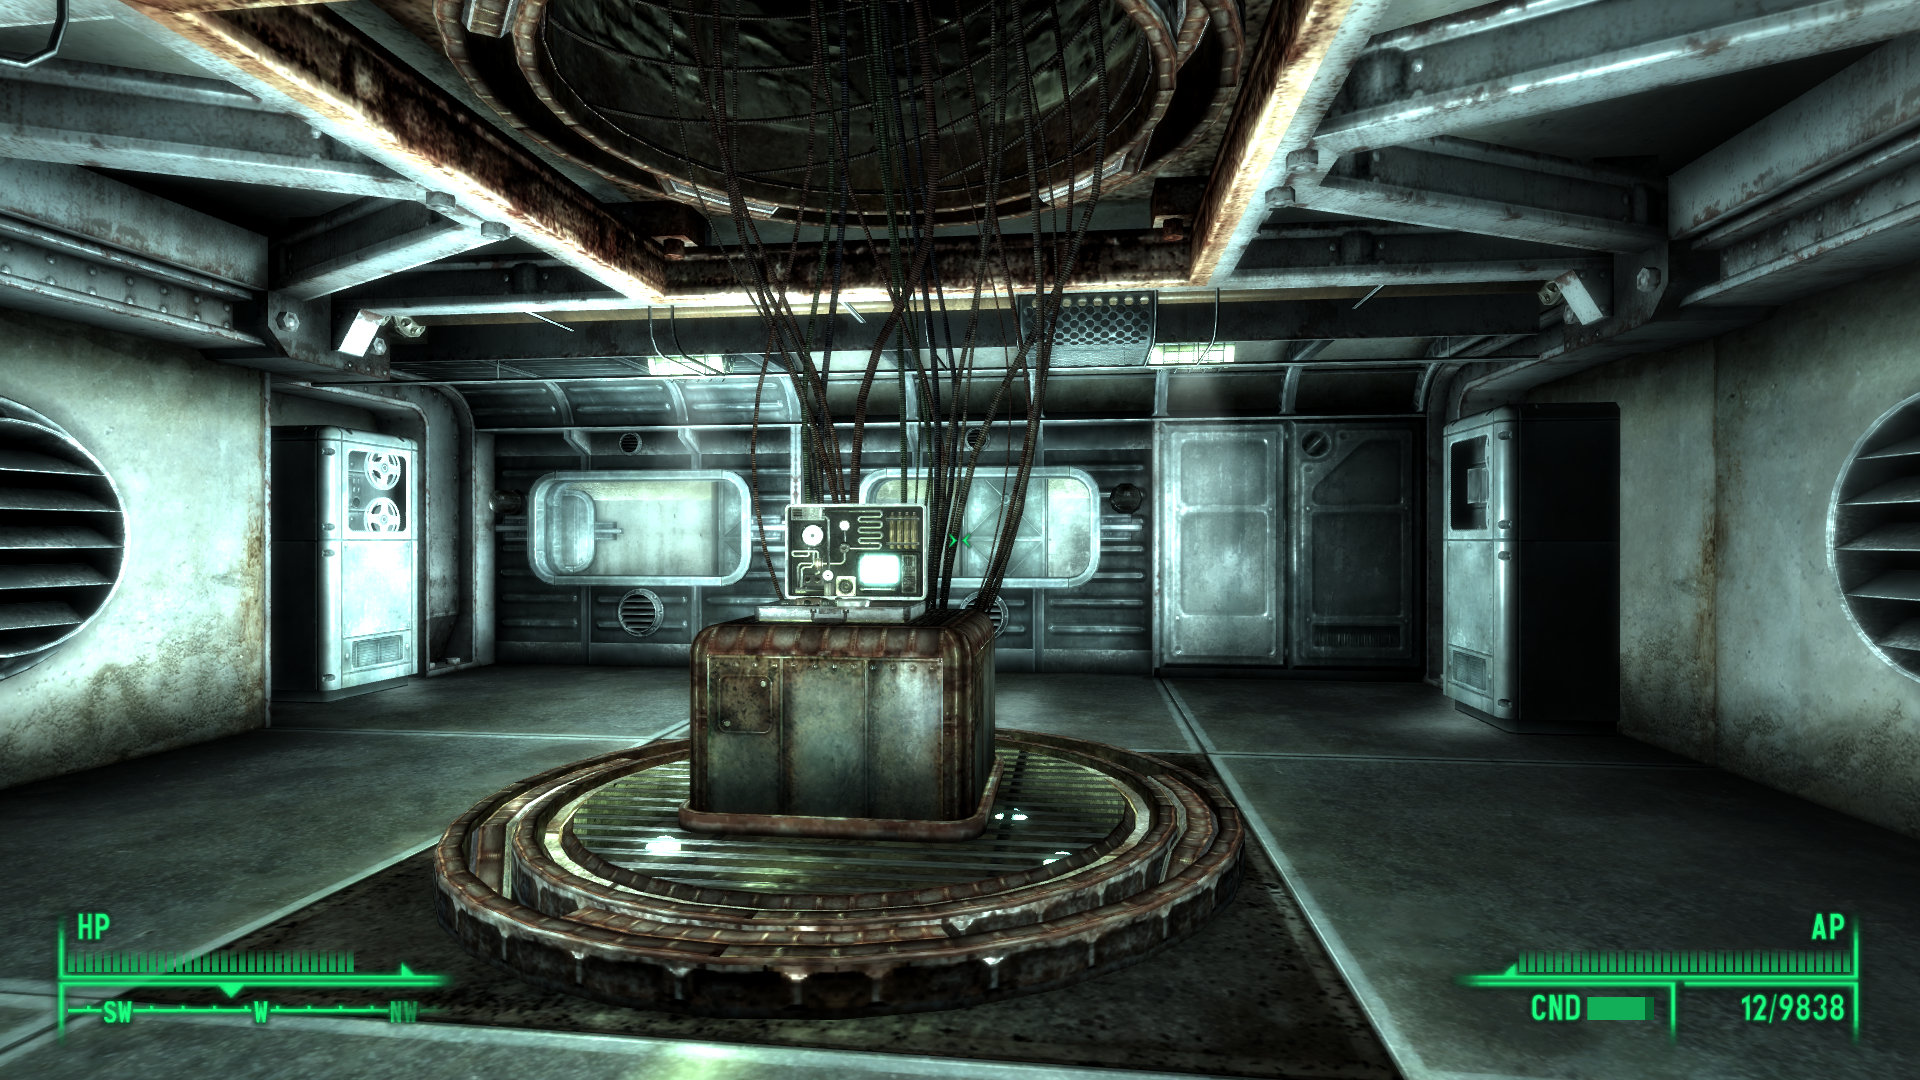 Version 0 4 Geck Chamber Image Vault 151 Mod For Fallout 3 Mod Db